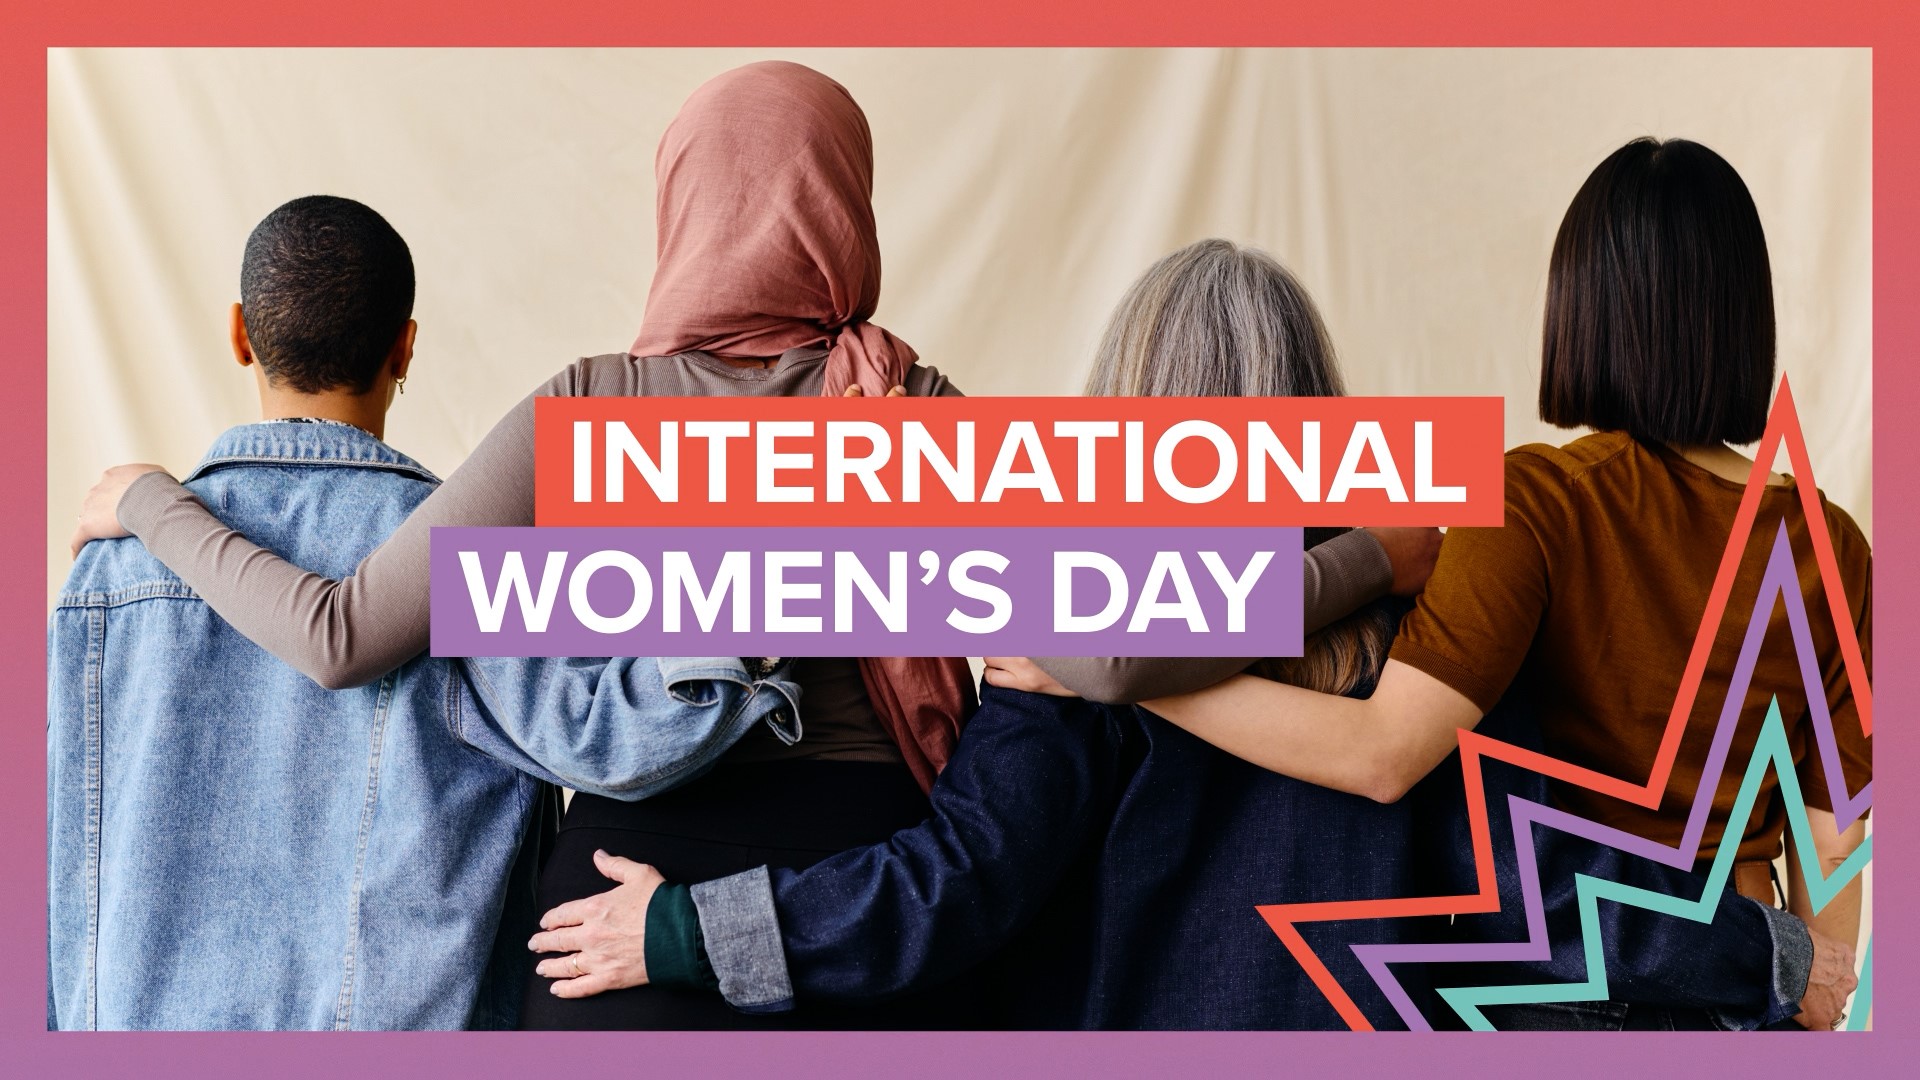 The theme for this year's International Women's Day is 'Break the Bias,' and it hopes to shed light on the biases against women the fuel gender inequality.